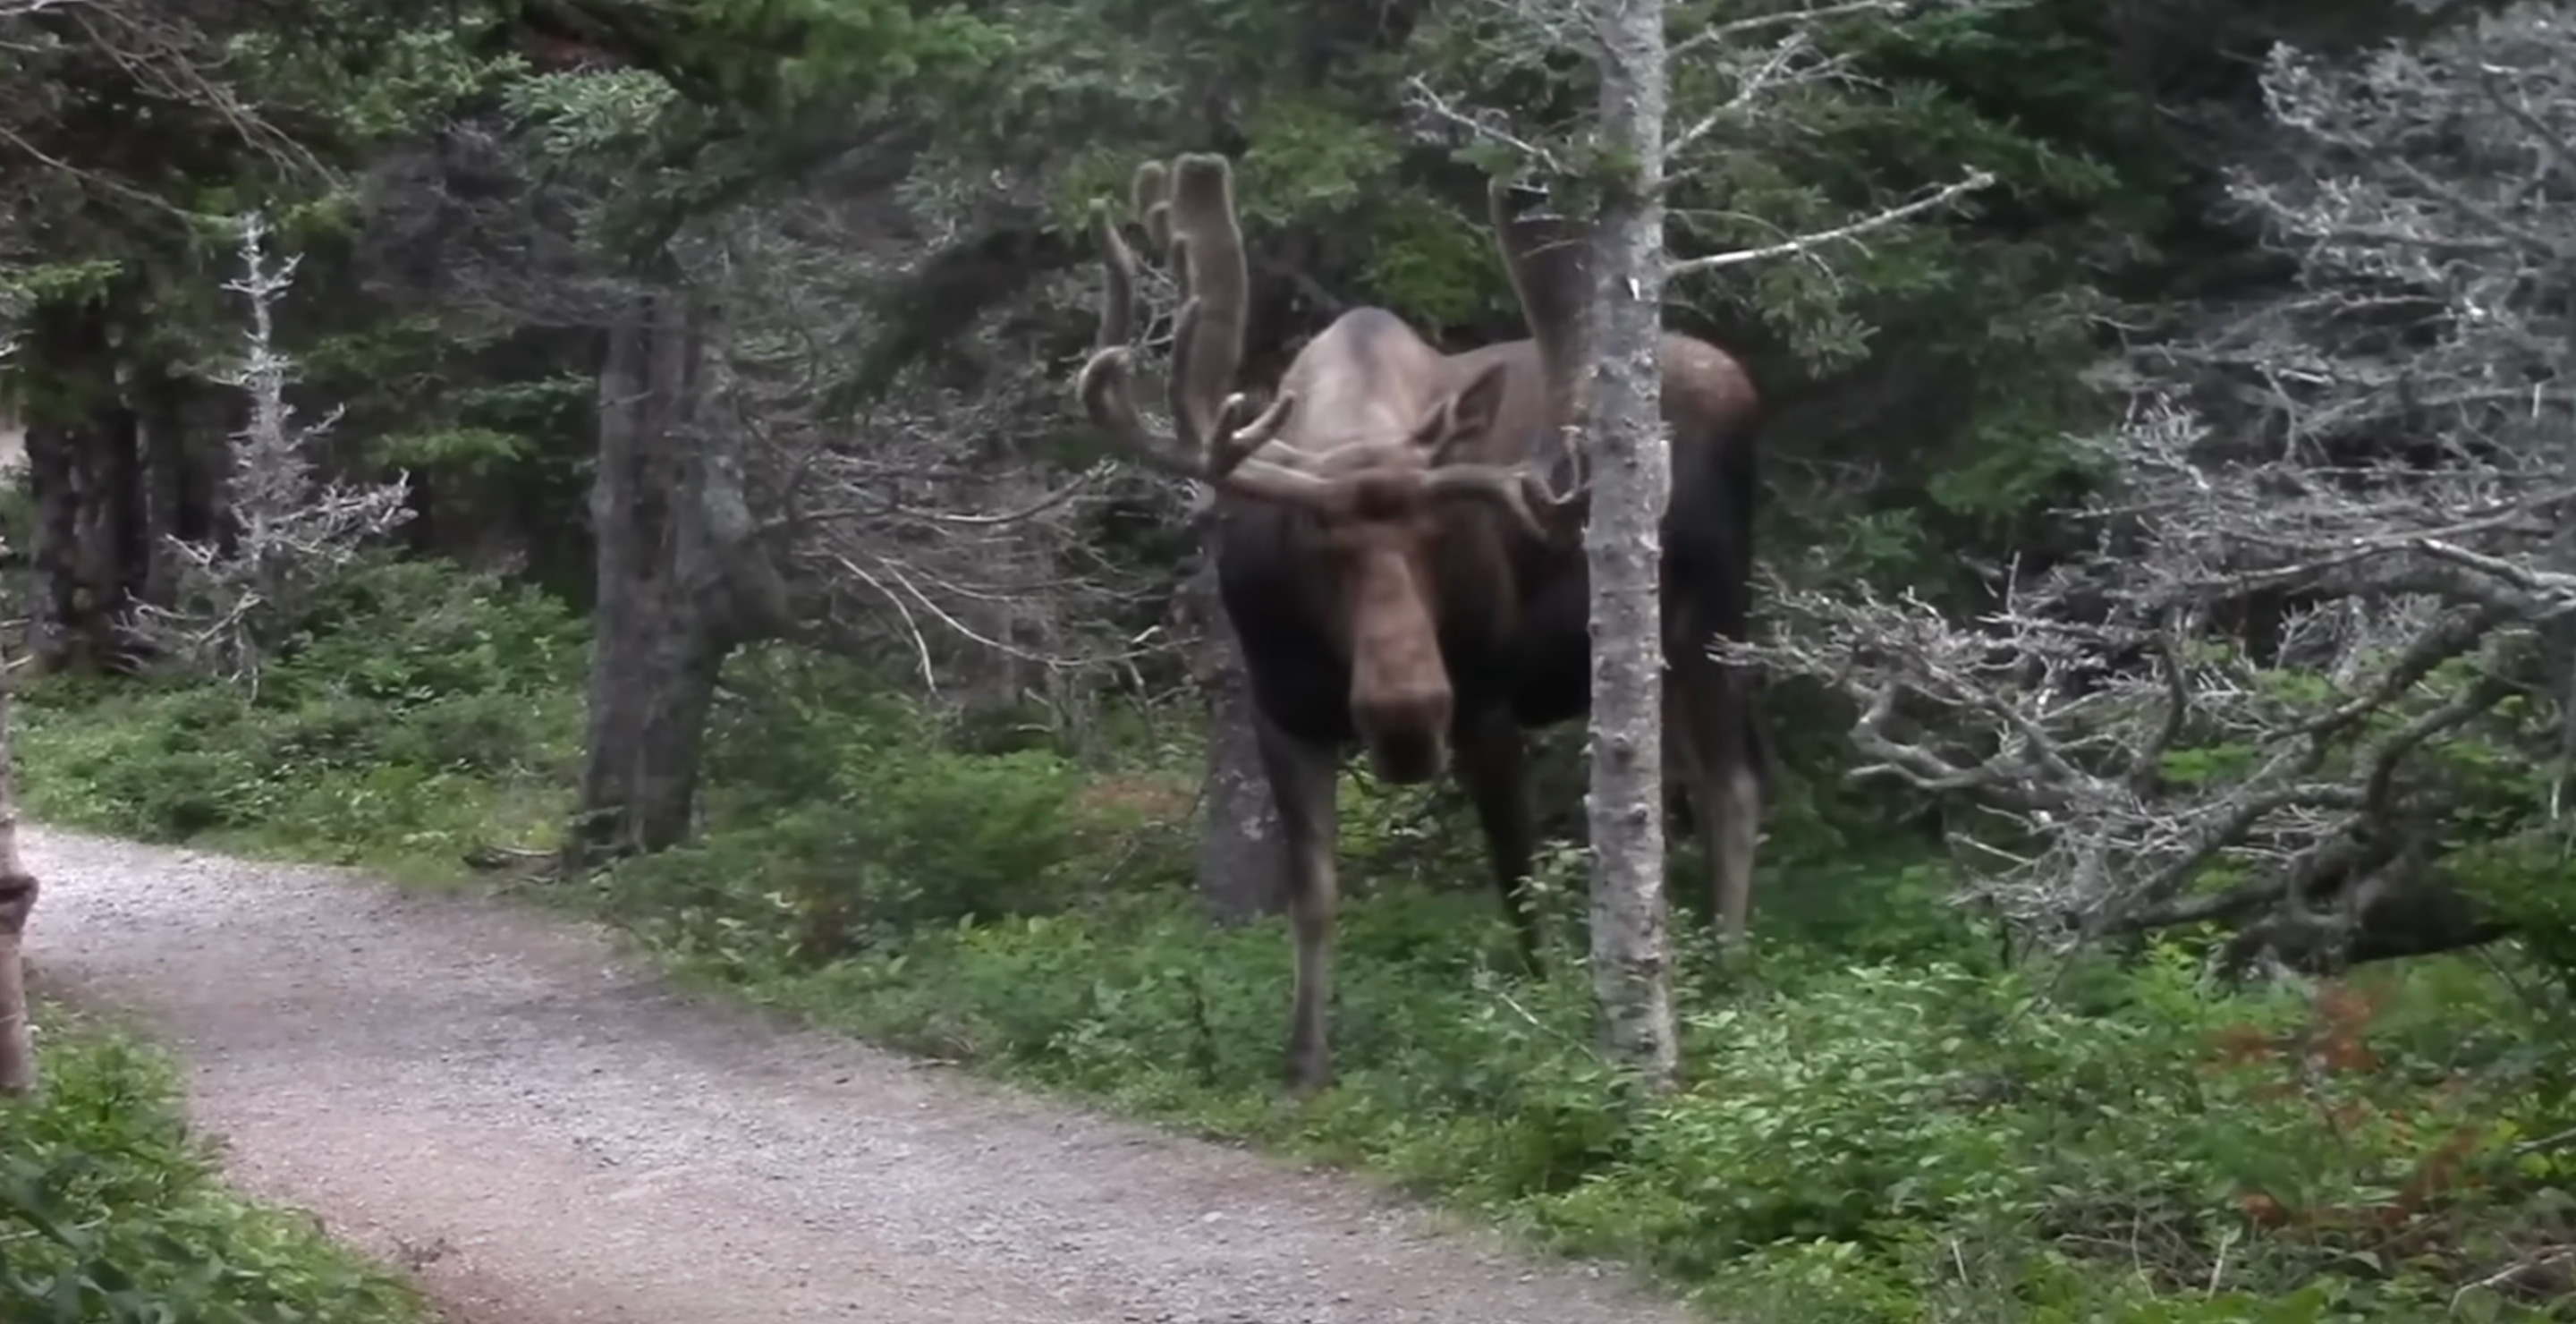 WATCH: Charging Moose Smashes Into Woman Walking Her Dog